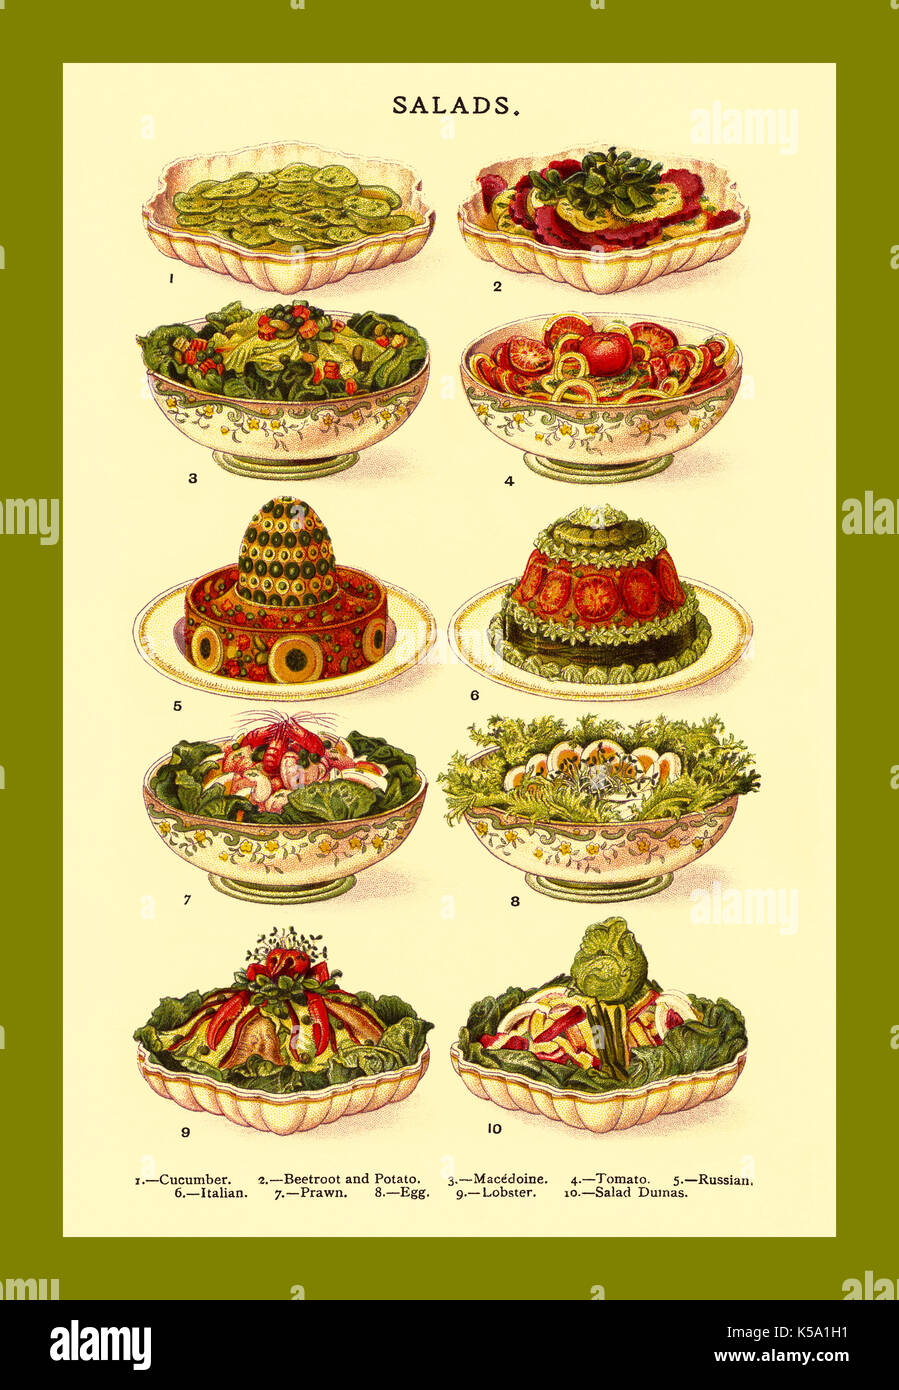 SALADS Vintage lithograph colour page illustration 1800’s Mrs Beeton's cookery book - salads L-R Cucumber, Beetroot and Potato, Macedoine, Tomato, Russian, Italian, Prawn, Egg, Lobster, Salad Dumas. Stock Photo